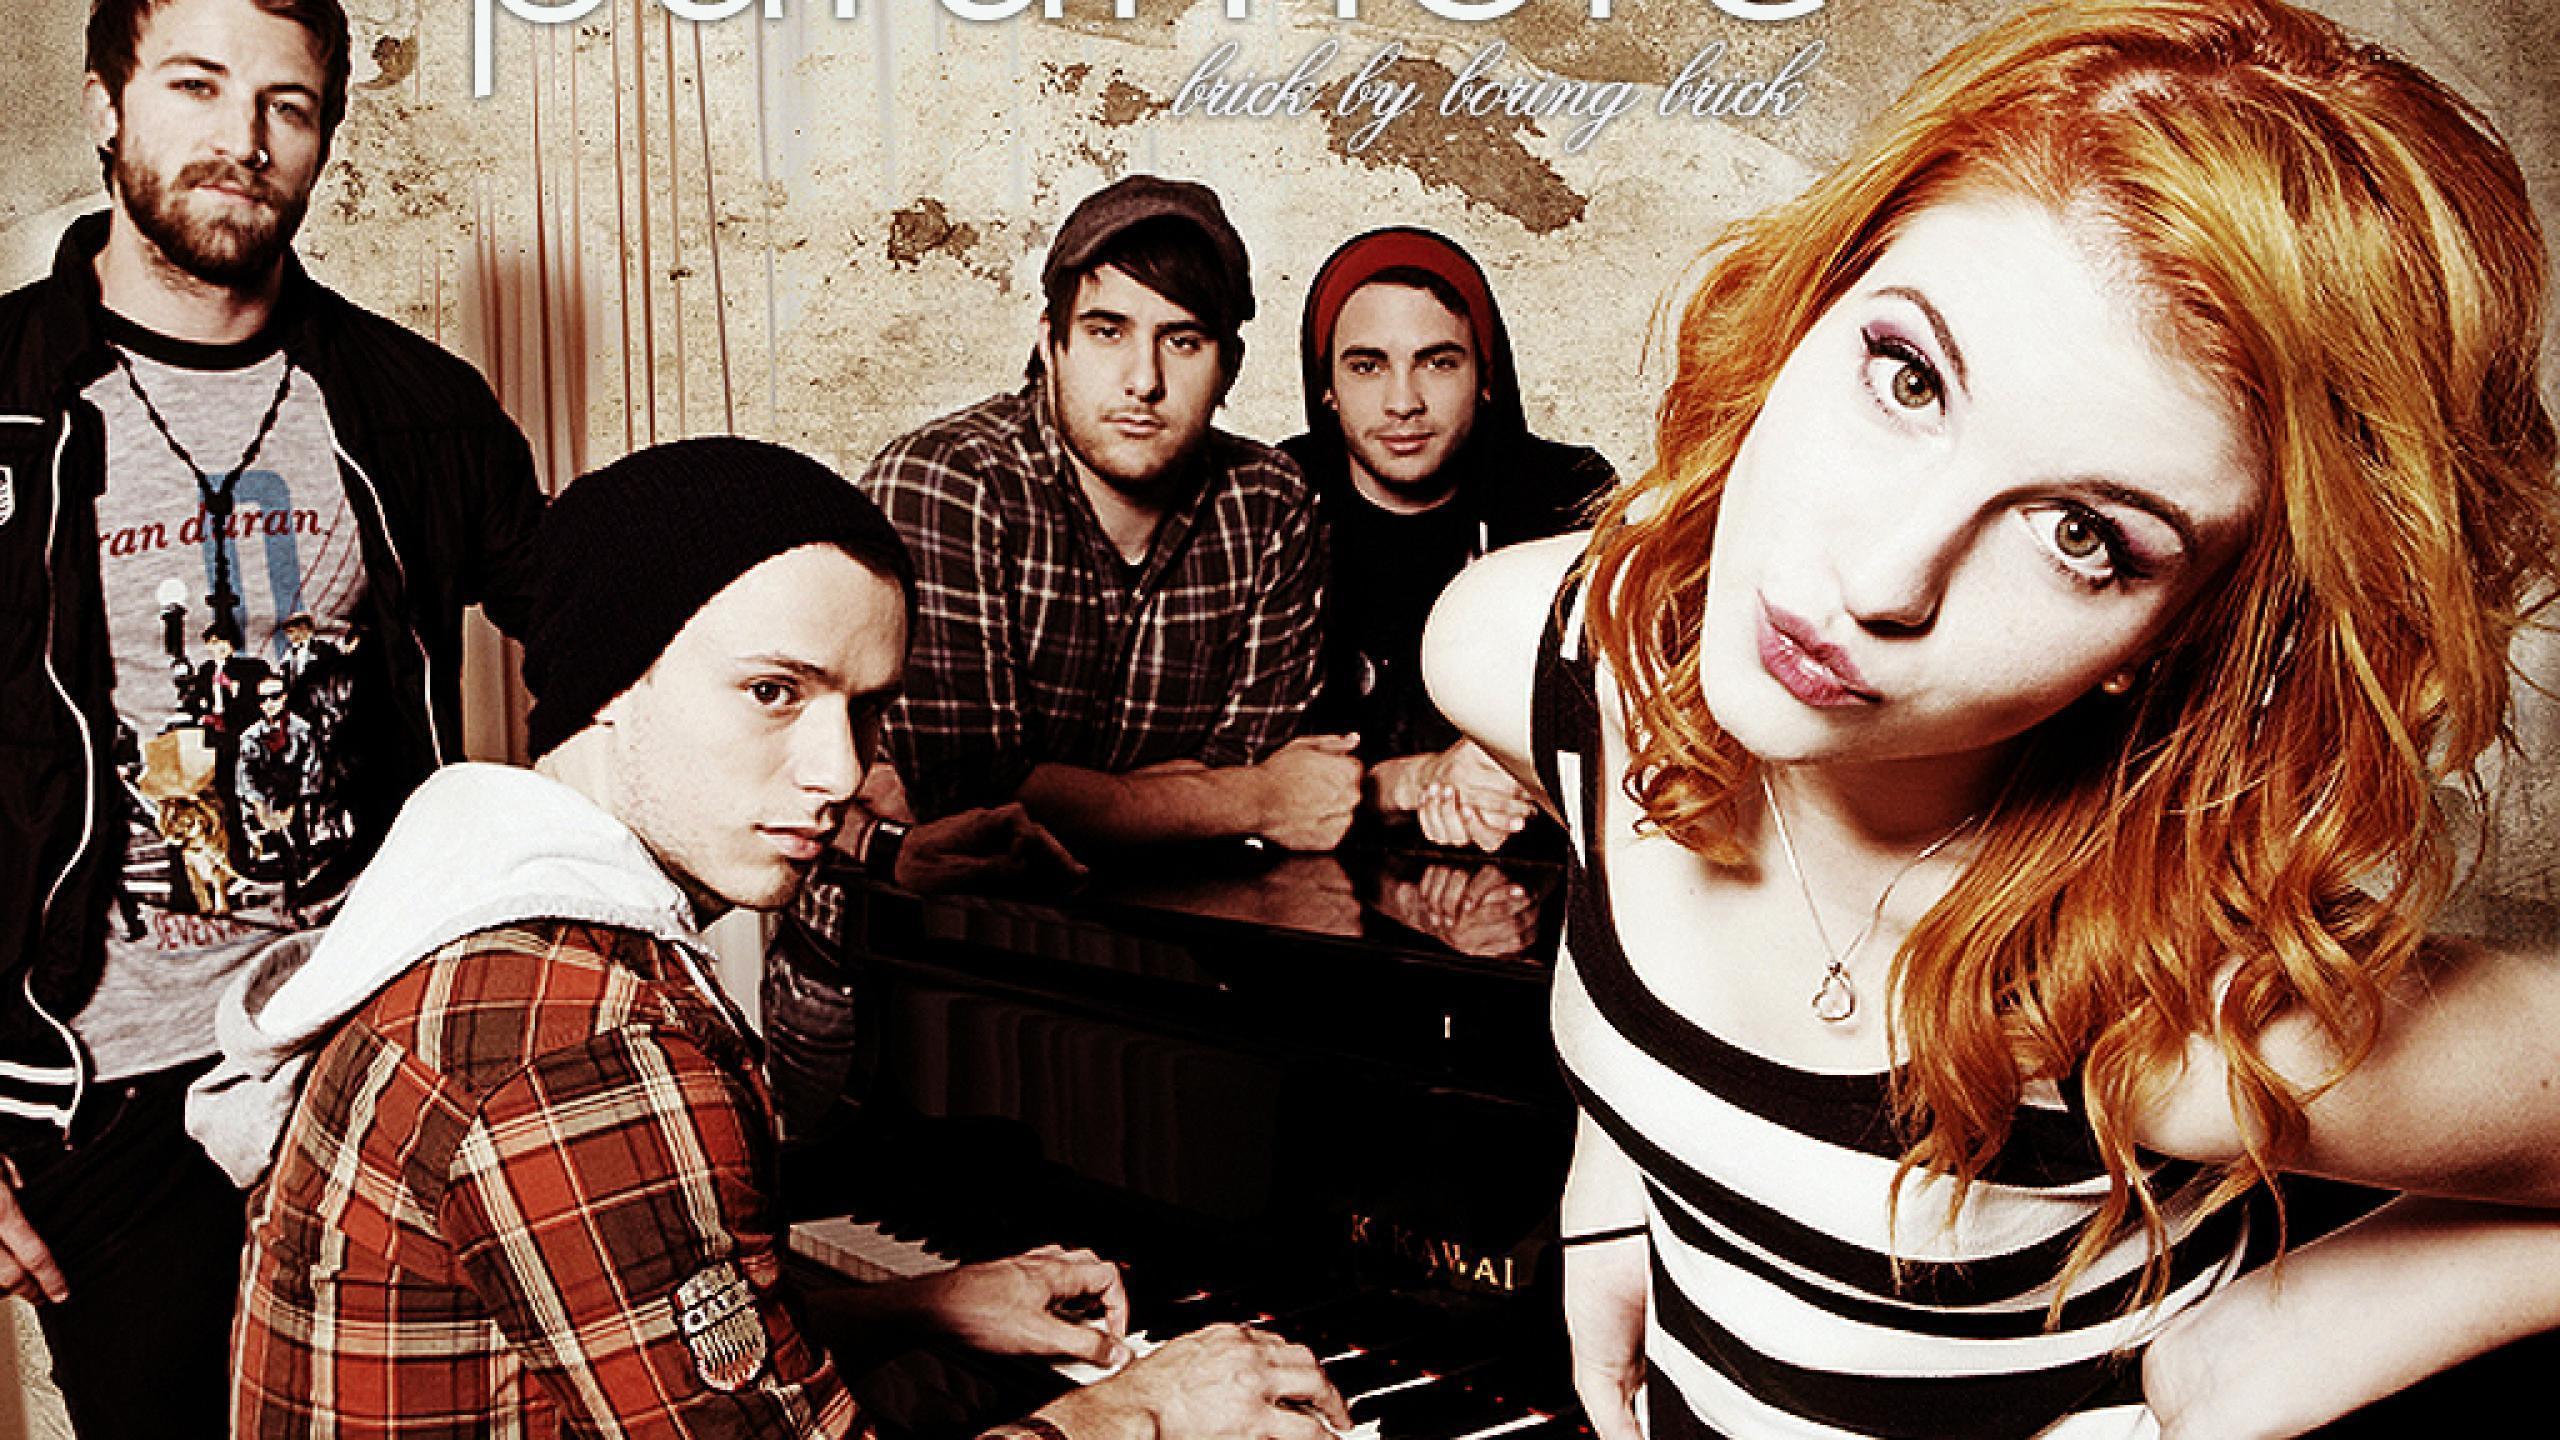 Download Paramore Image Wallpaper nua81vv6m Page